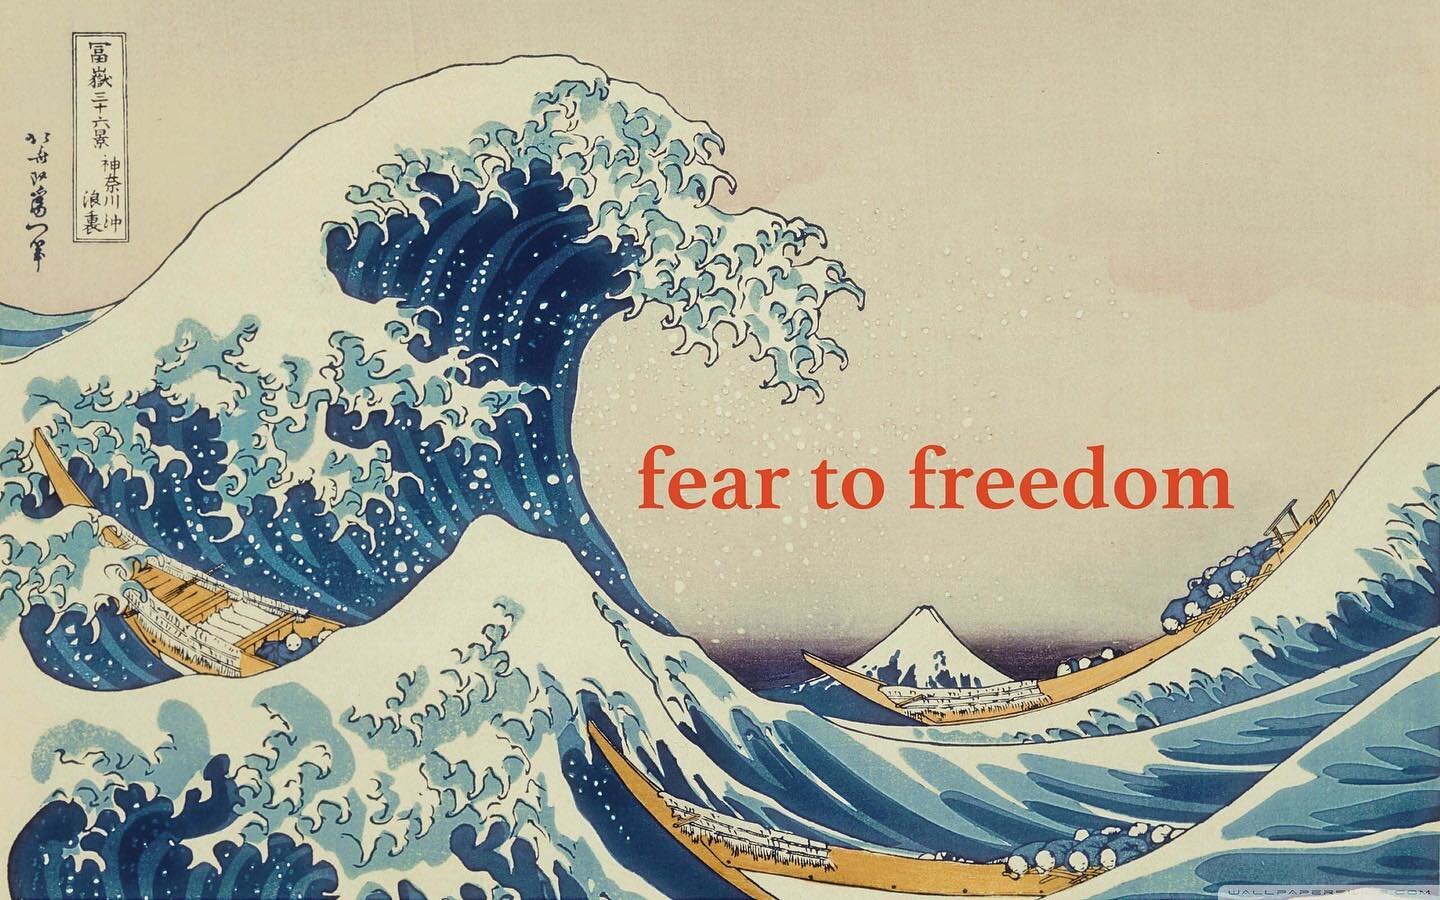 FEAR TO FREEDOM

3 WEEK COACHING PROGRAM DESIGNED FOR POST LOCKDOWN CONFUSION

A coaching package to provide support, clarity and focus in these uncertain times of POST LOCKDOWN. 

In a time of uncertainty do you feel overwhelmed about what&rsquo;s n